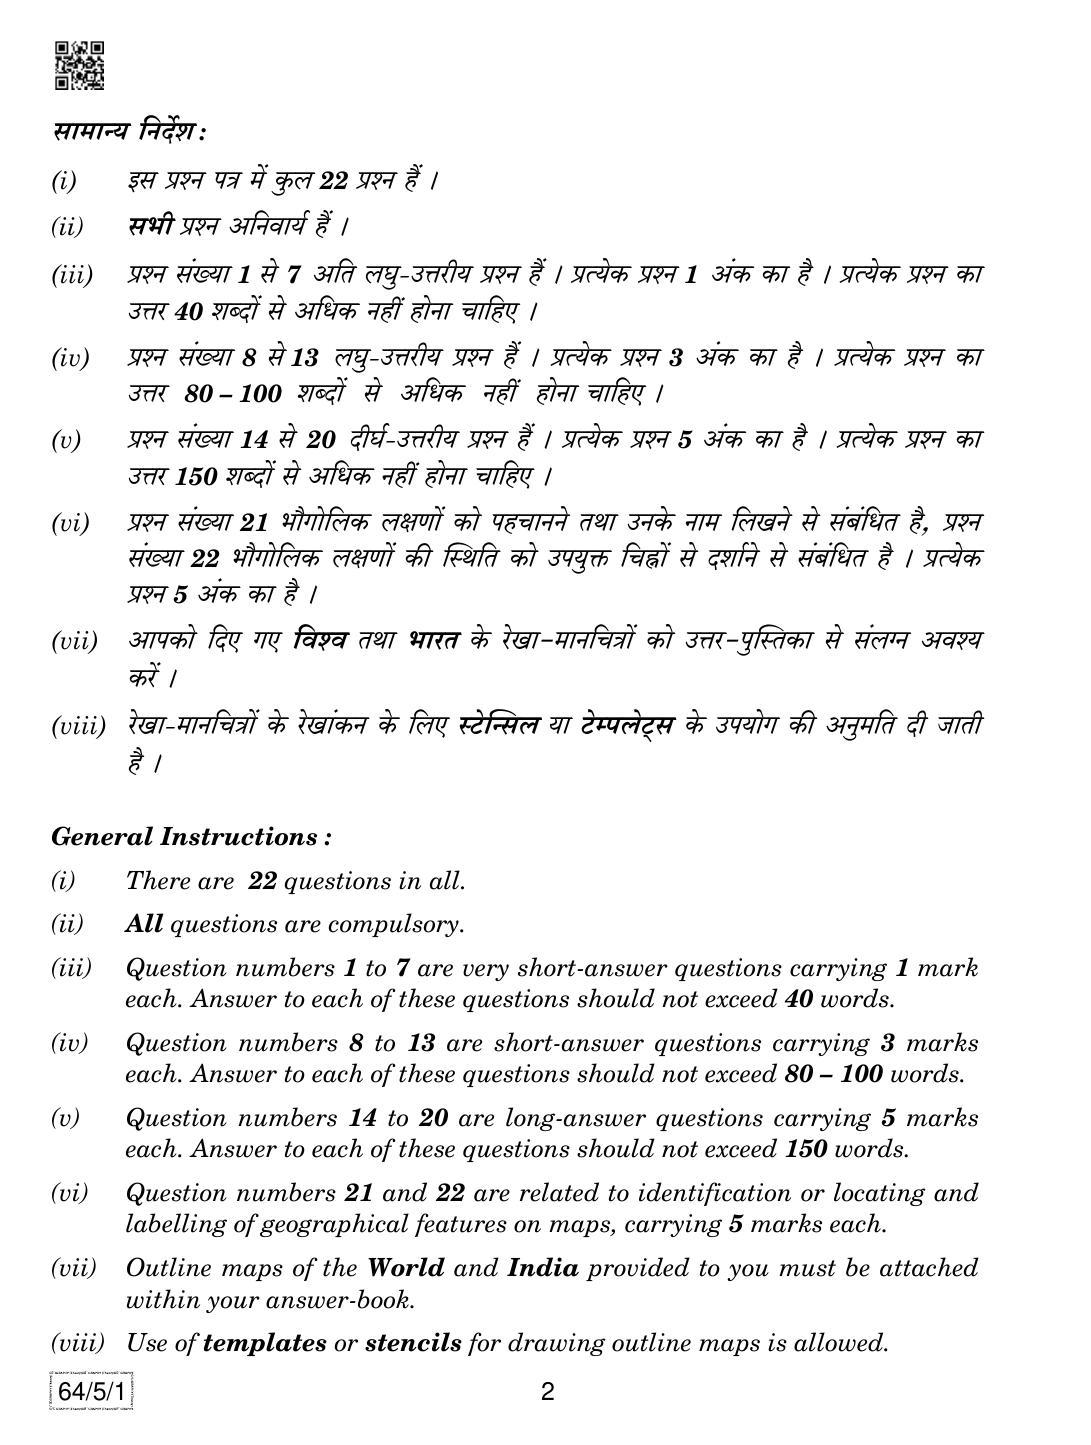 CBSE Class 12 64-5-1 Geography 2019 Question Paper - Page 2